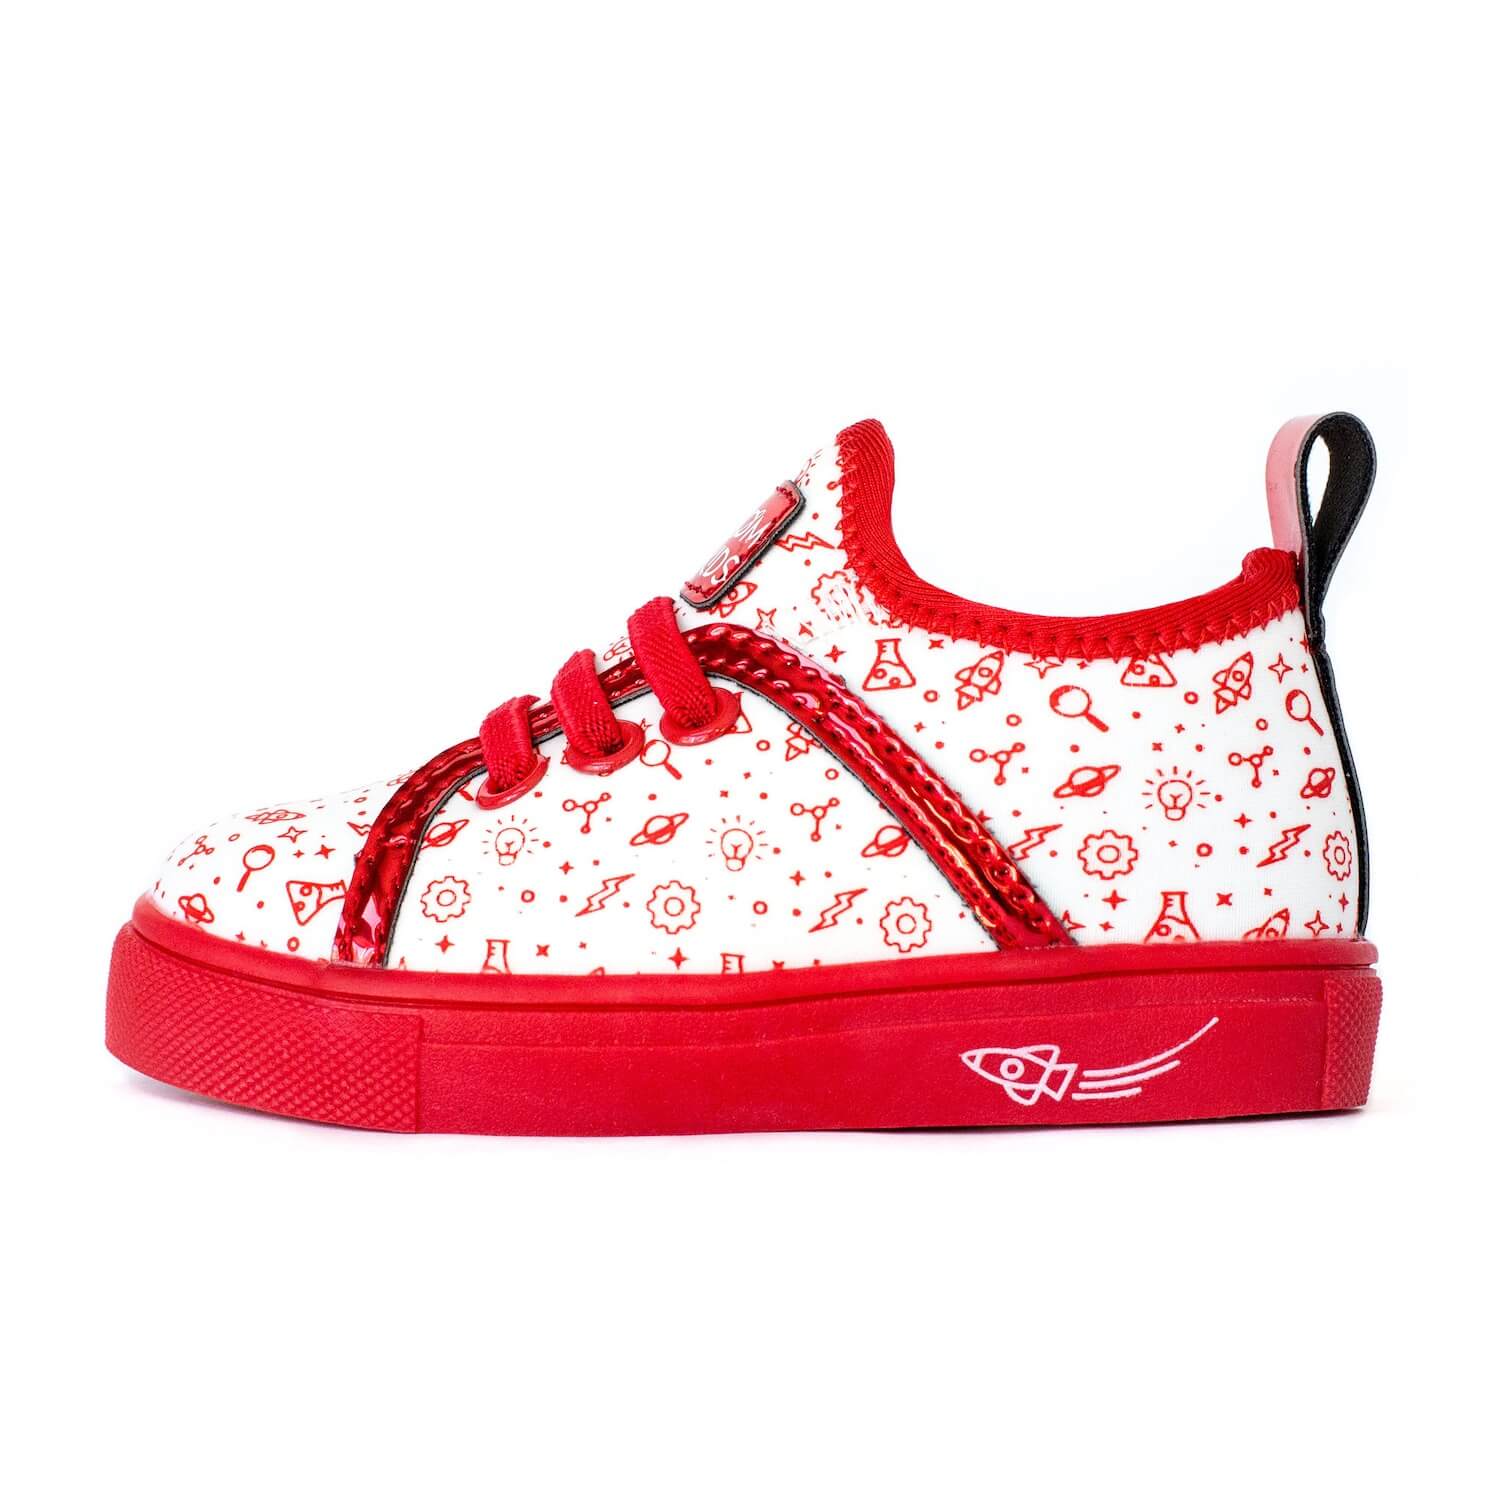 red girls tennis shoes